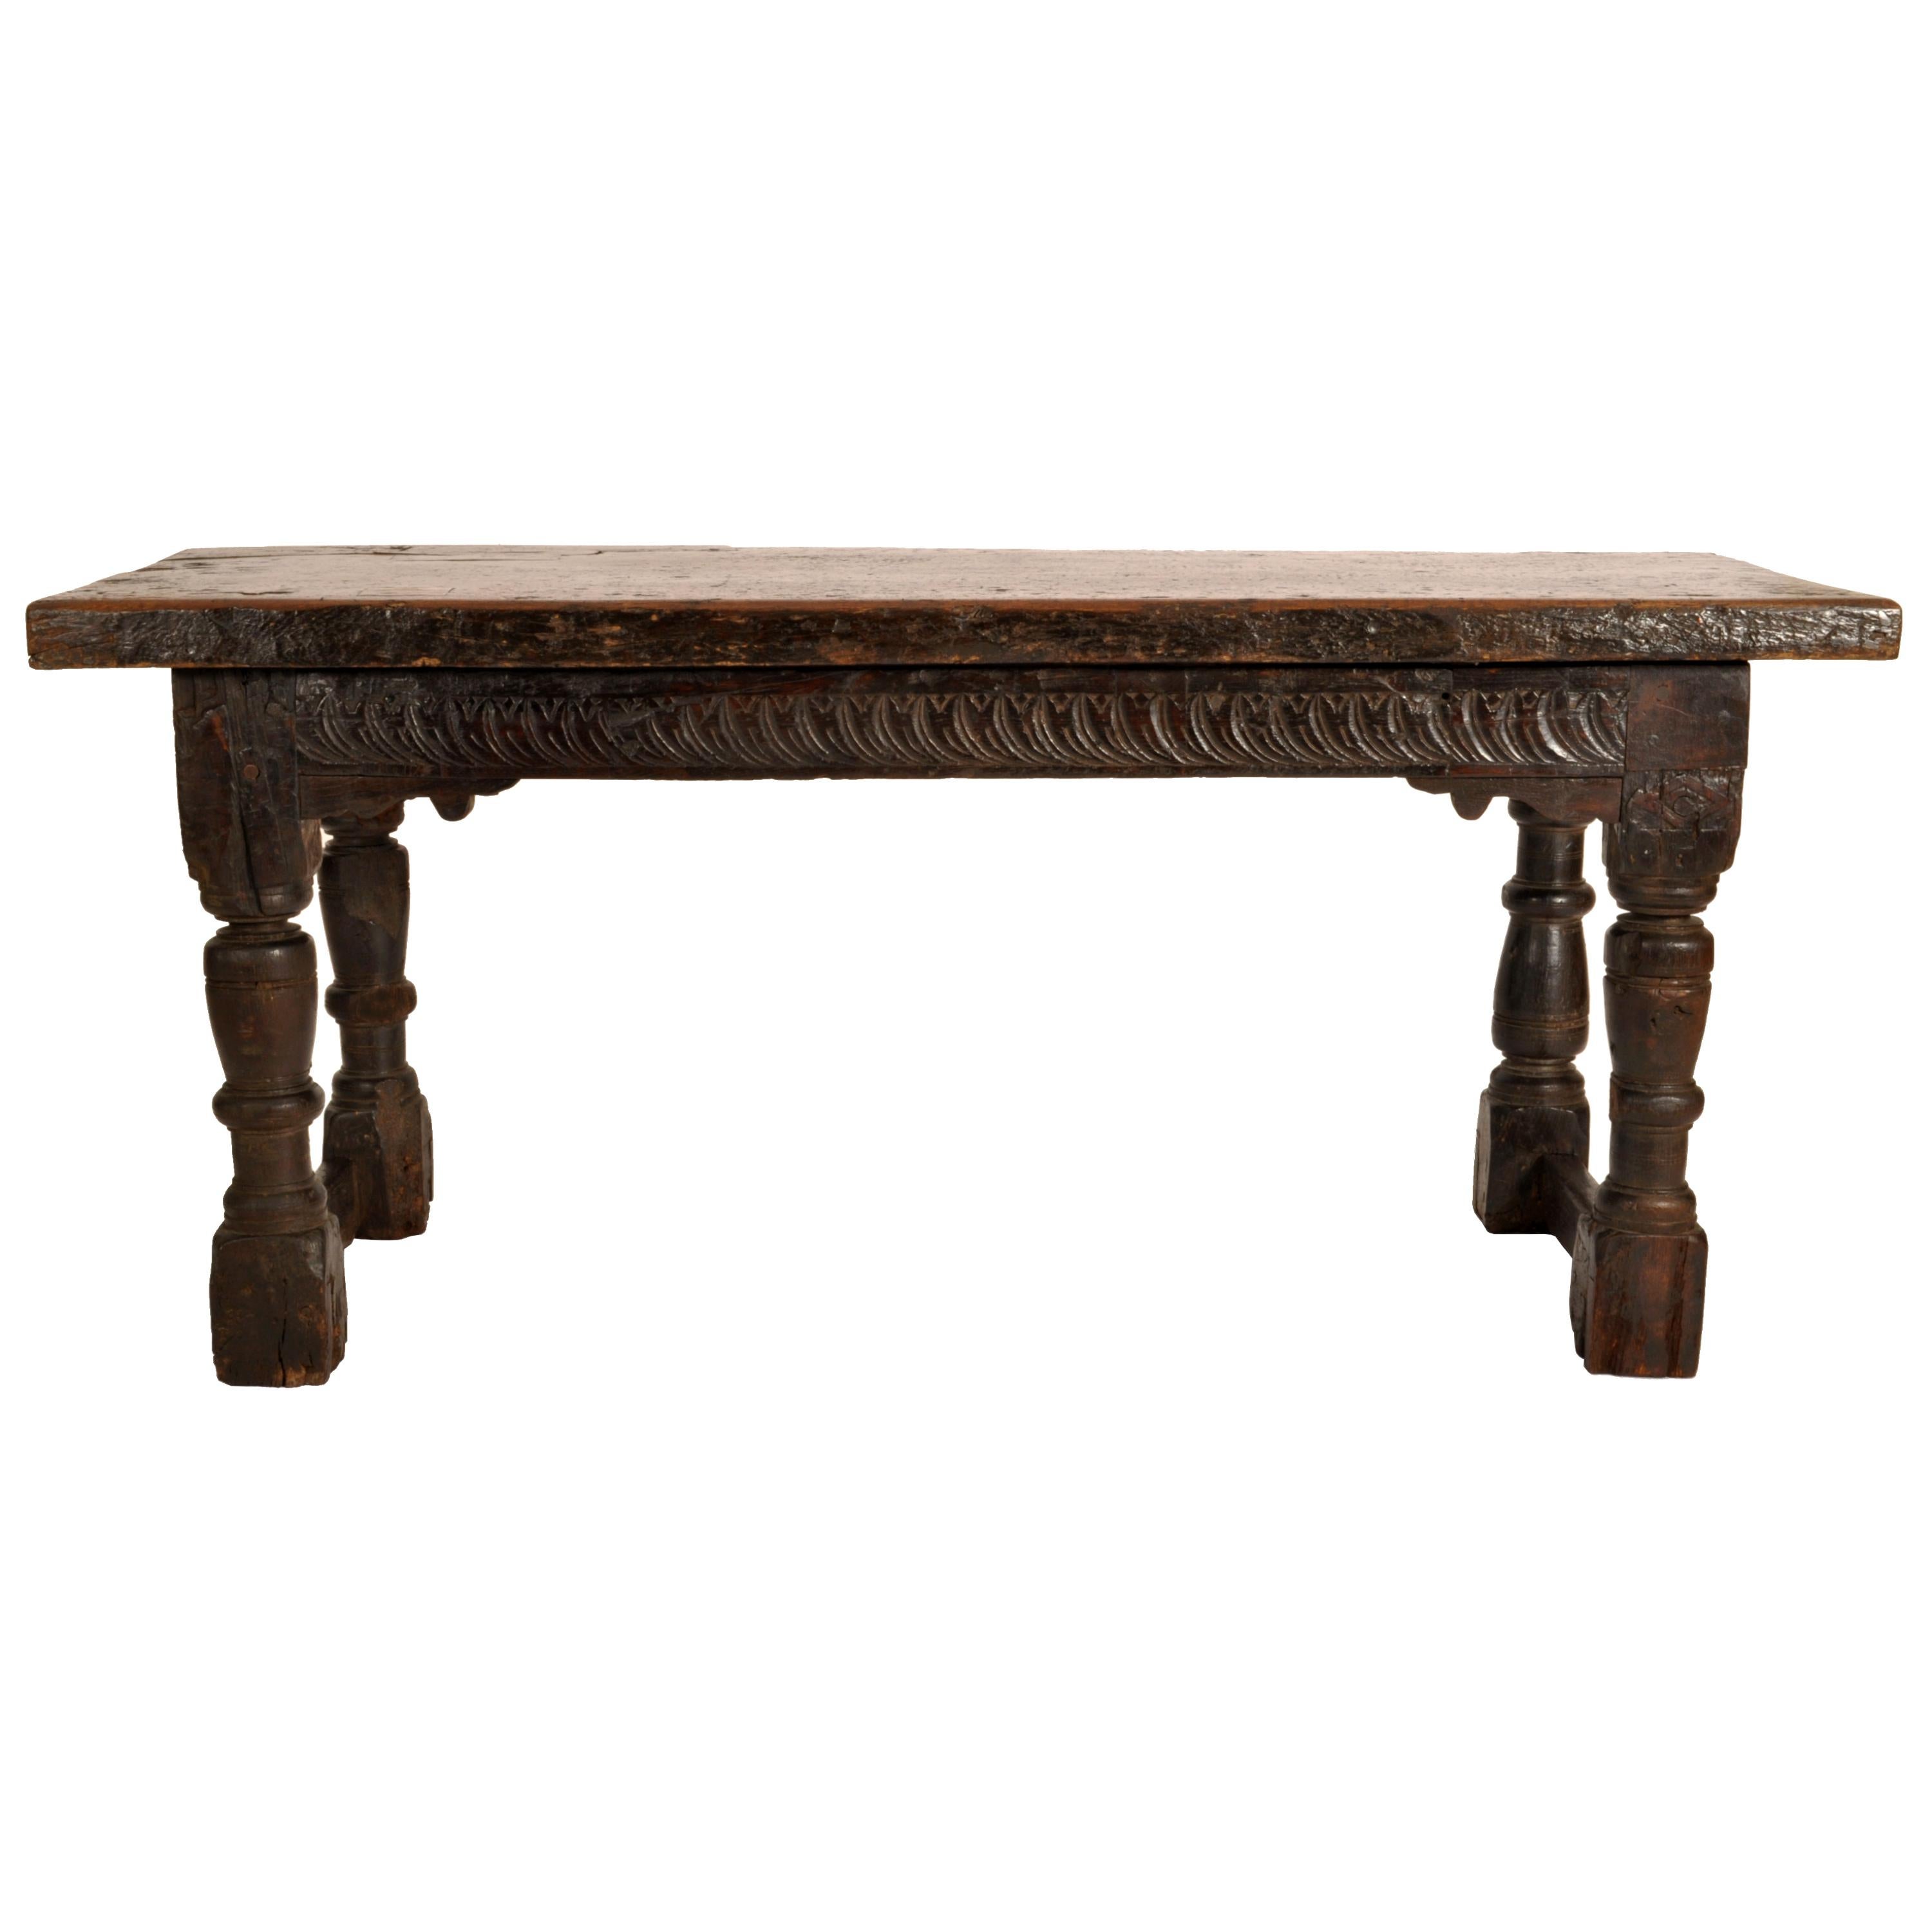 Hand-Carved Antique 16th Century Elizabethan Tudor Carved Oak Dining Refectory Table, 1550